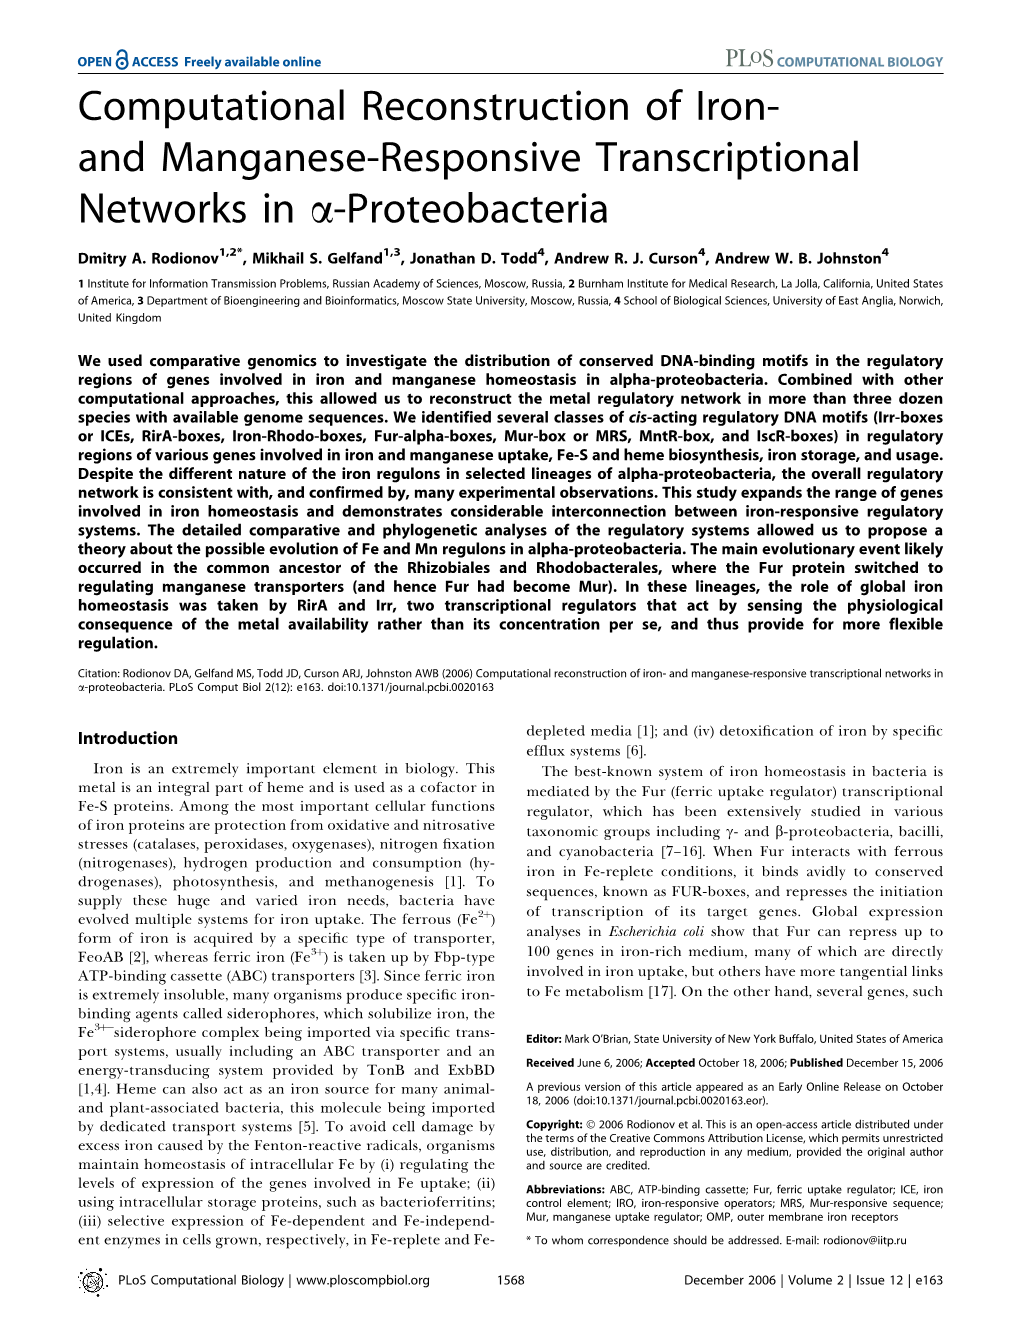 And Manganese-Responsive Transcriptional Networks in A-Proteobacteria